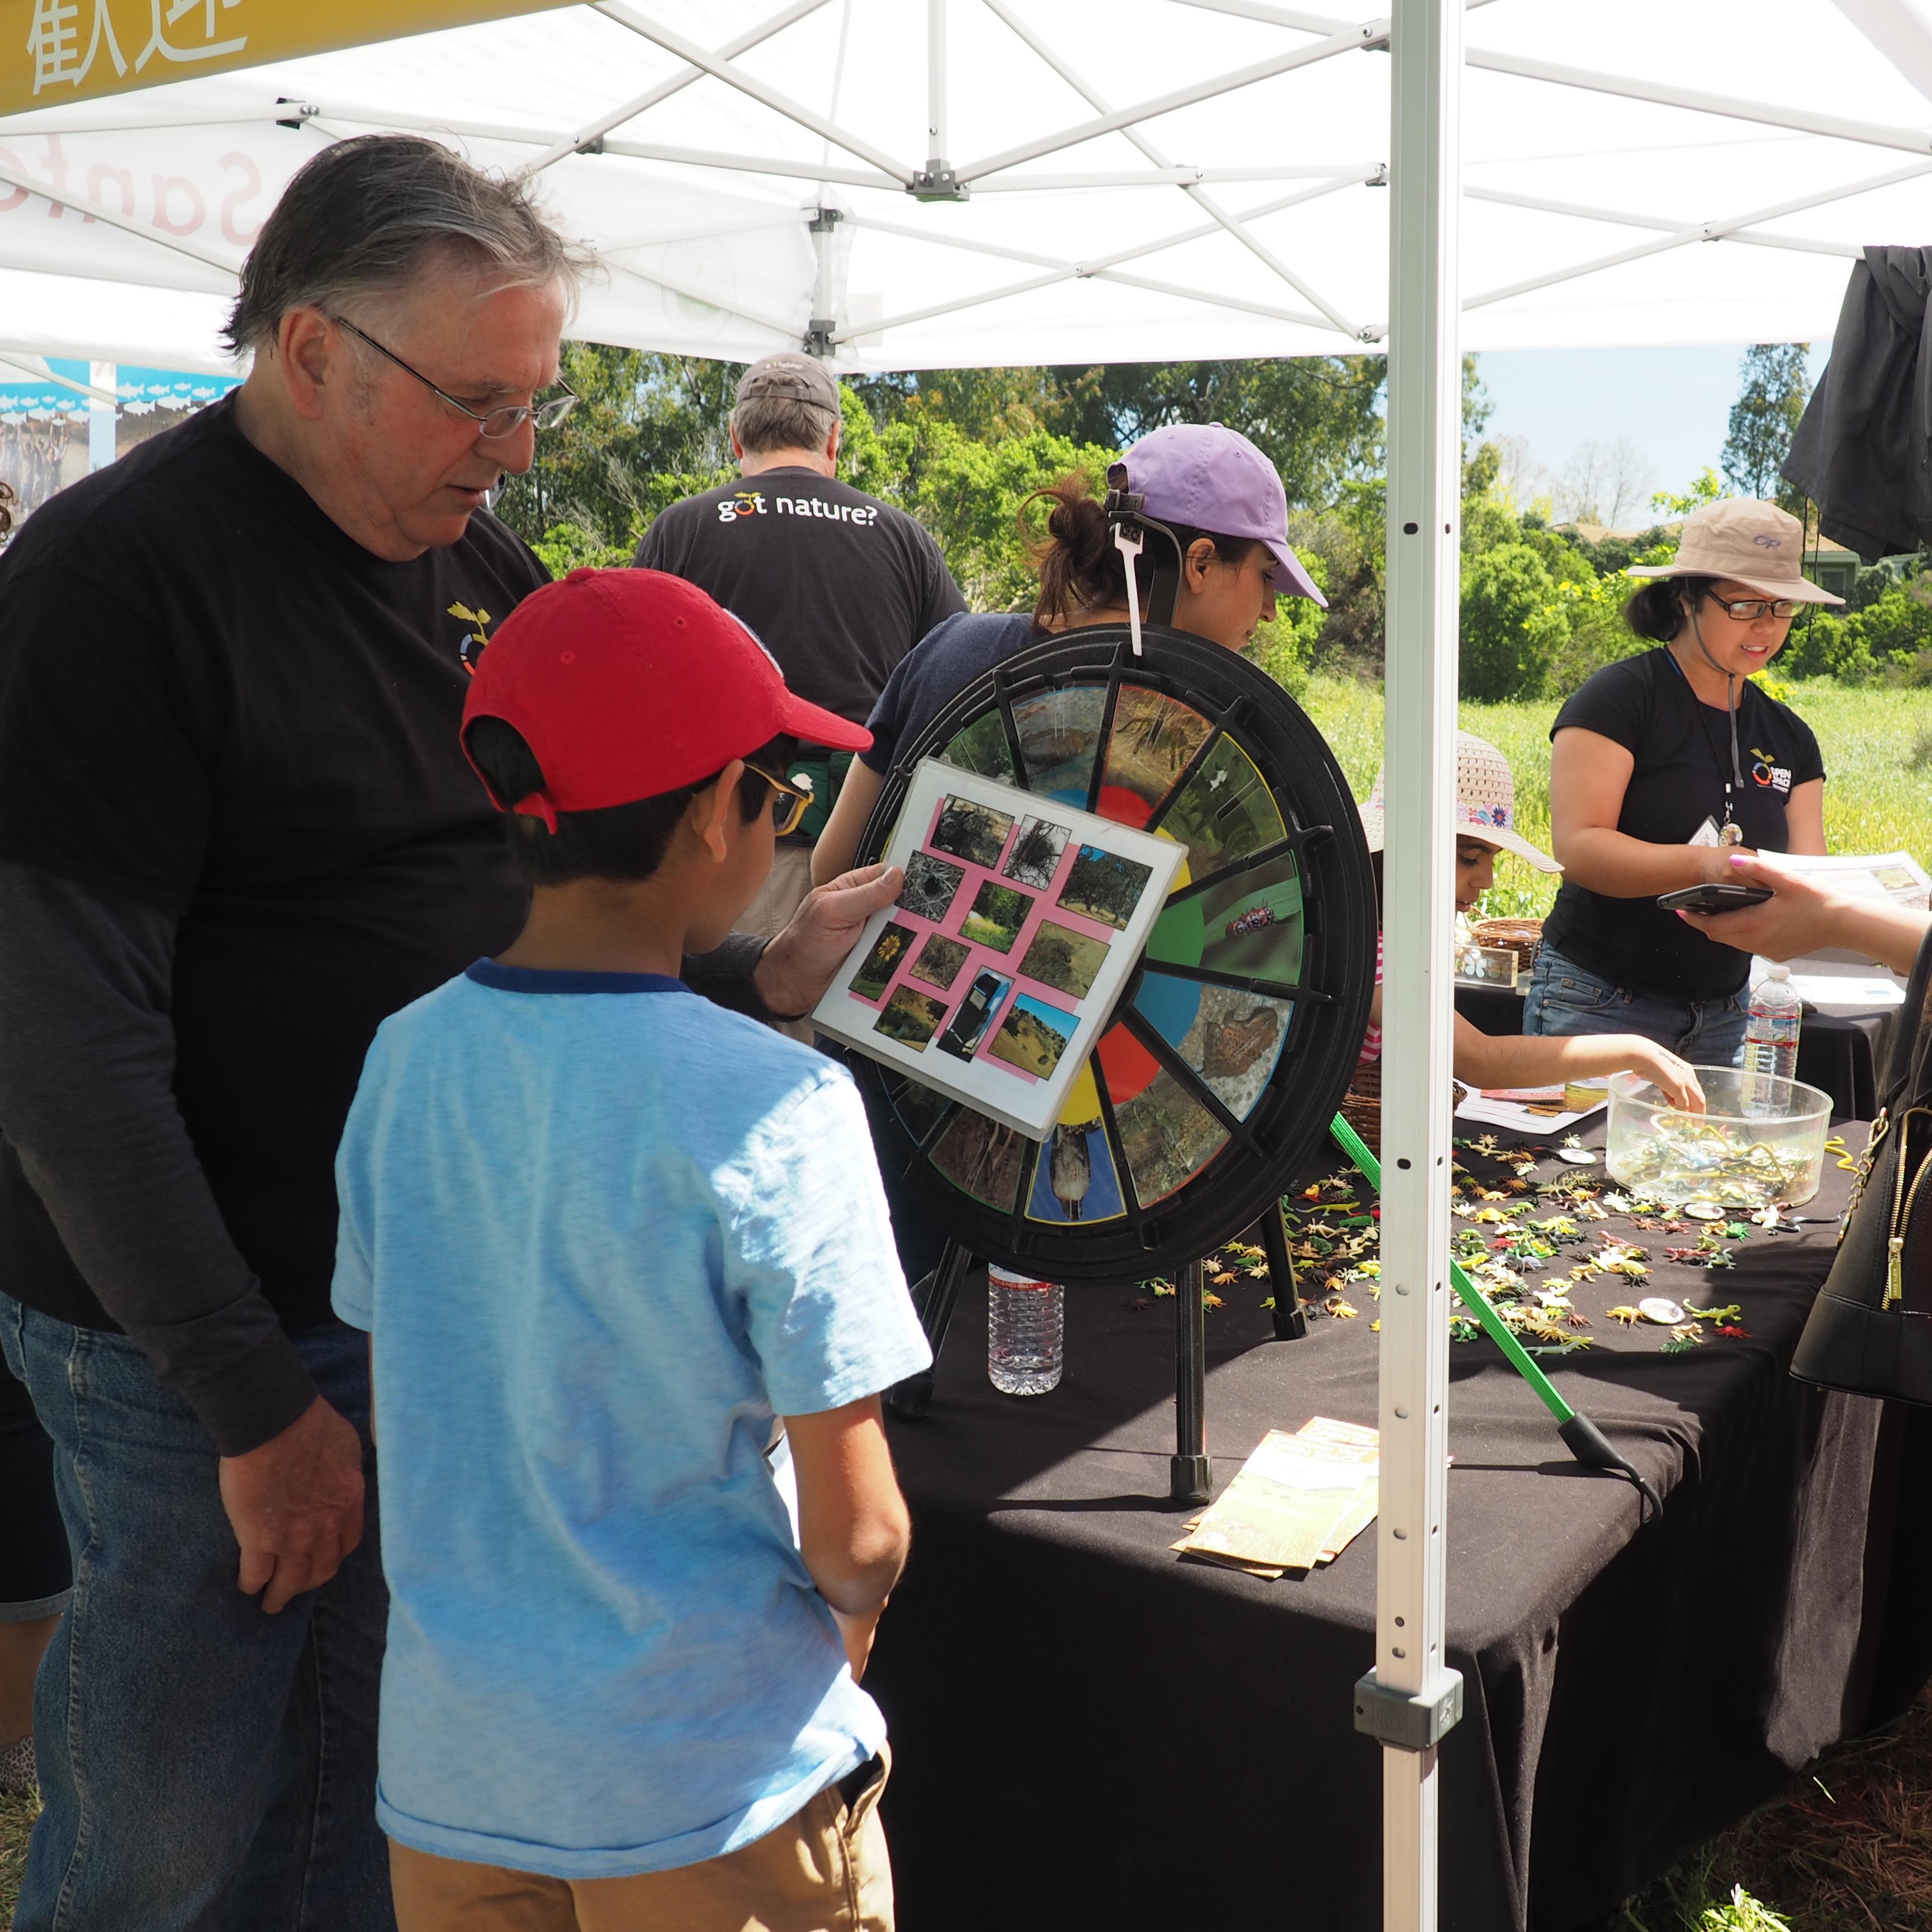 Male volunteer showing child nature game at booth